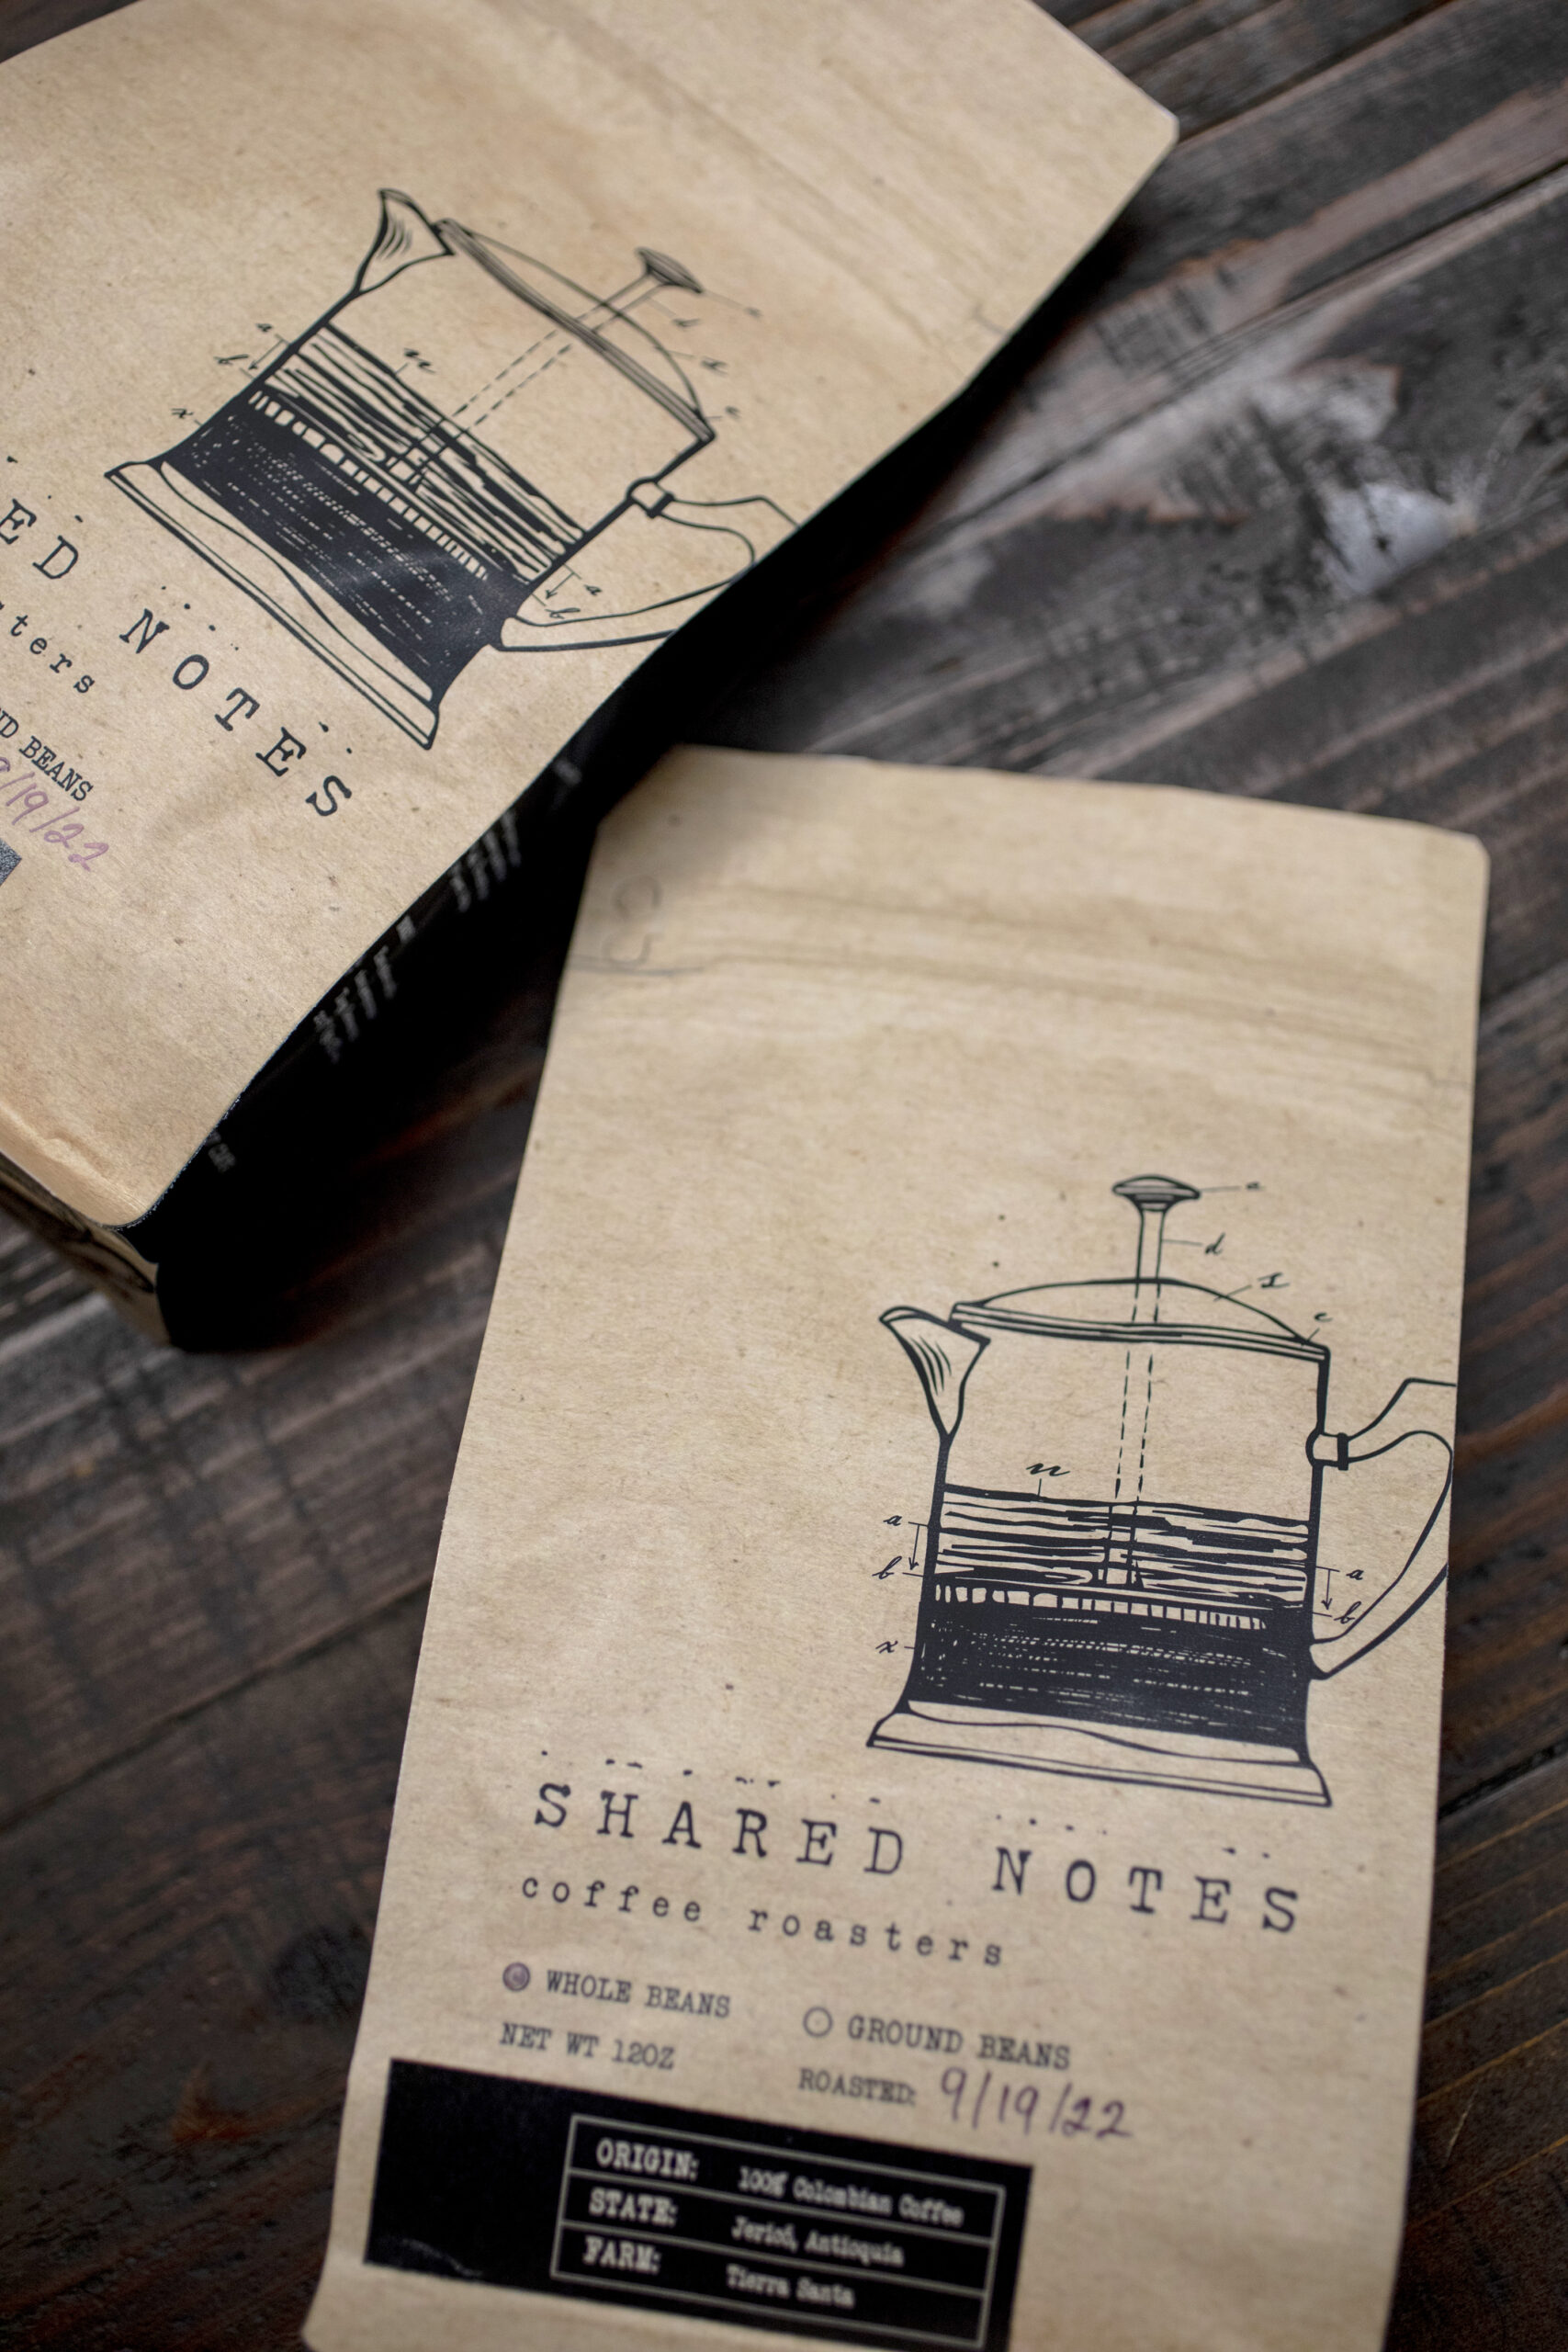 Shared Notes coffee is available at the winery and online. (Chad Surmick / The Press Democrat)